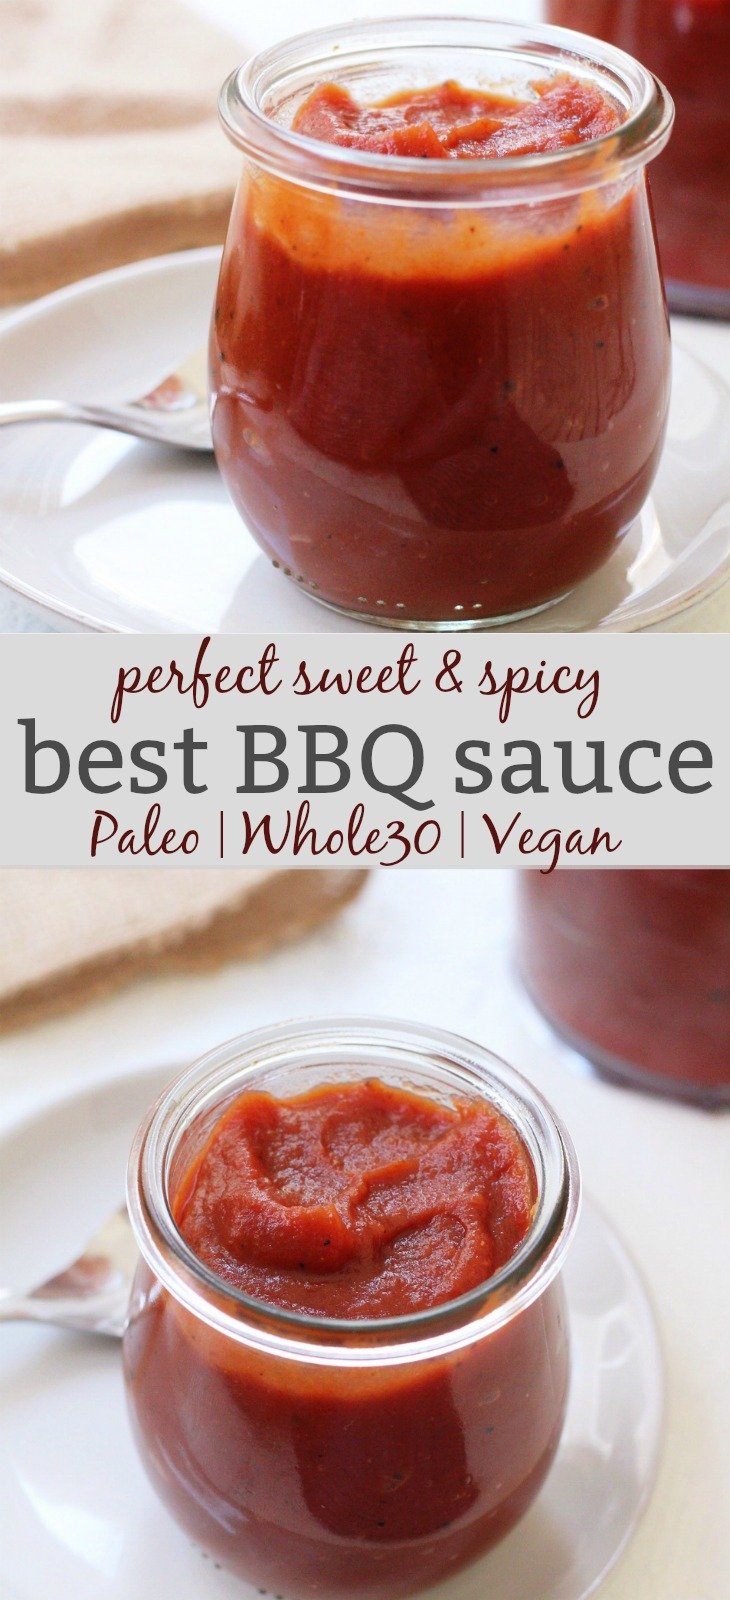 Whole30 BBQ sauce is an easy condiment to whip up in your own kitchen. The paleo BBQ is also vegan and 100% a sugar free BBQ option! It's great to keep around for pulled pork, BBQ grilled chicken, ribs, you name it! #paleobbqsauce #whole30bbqsauce #sugarfreebbq